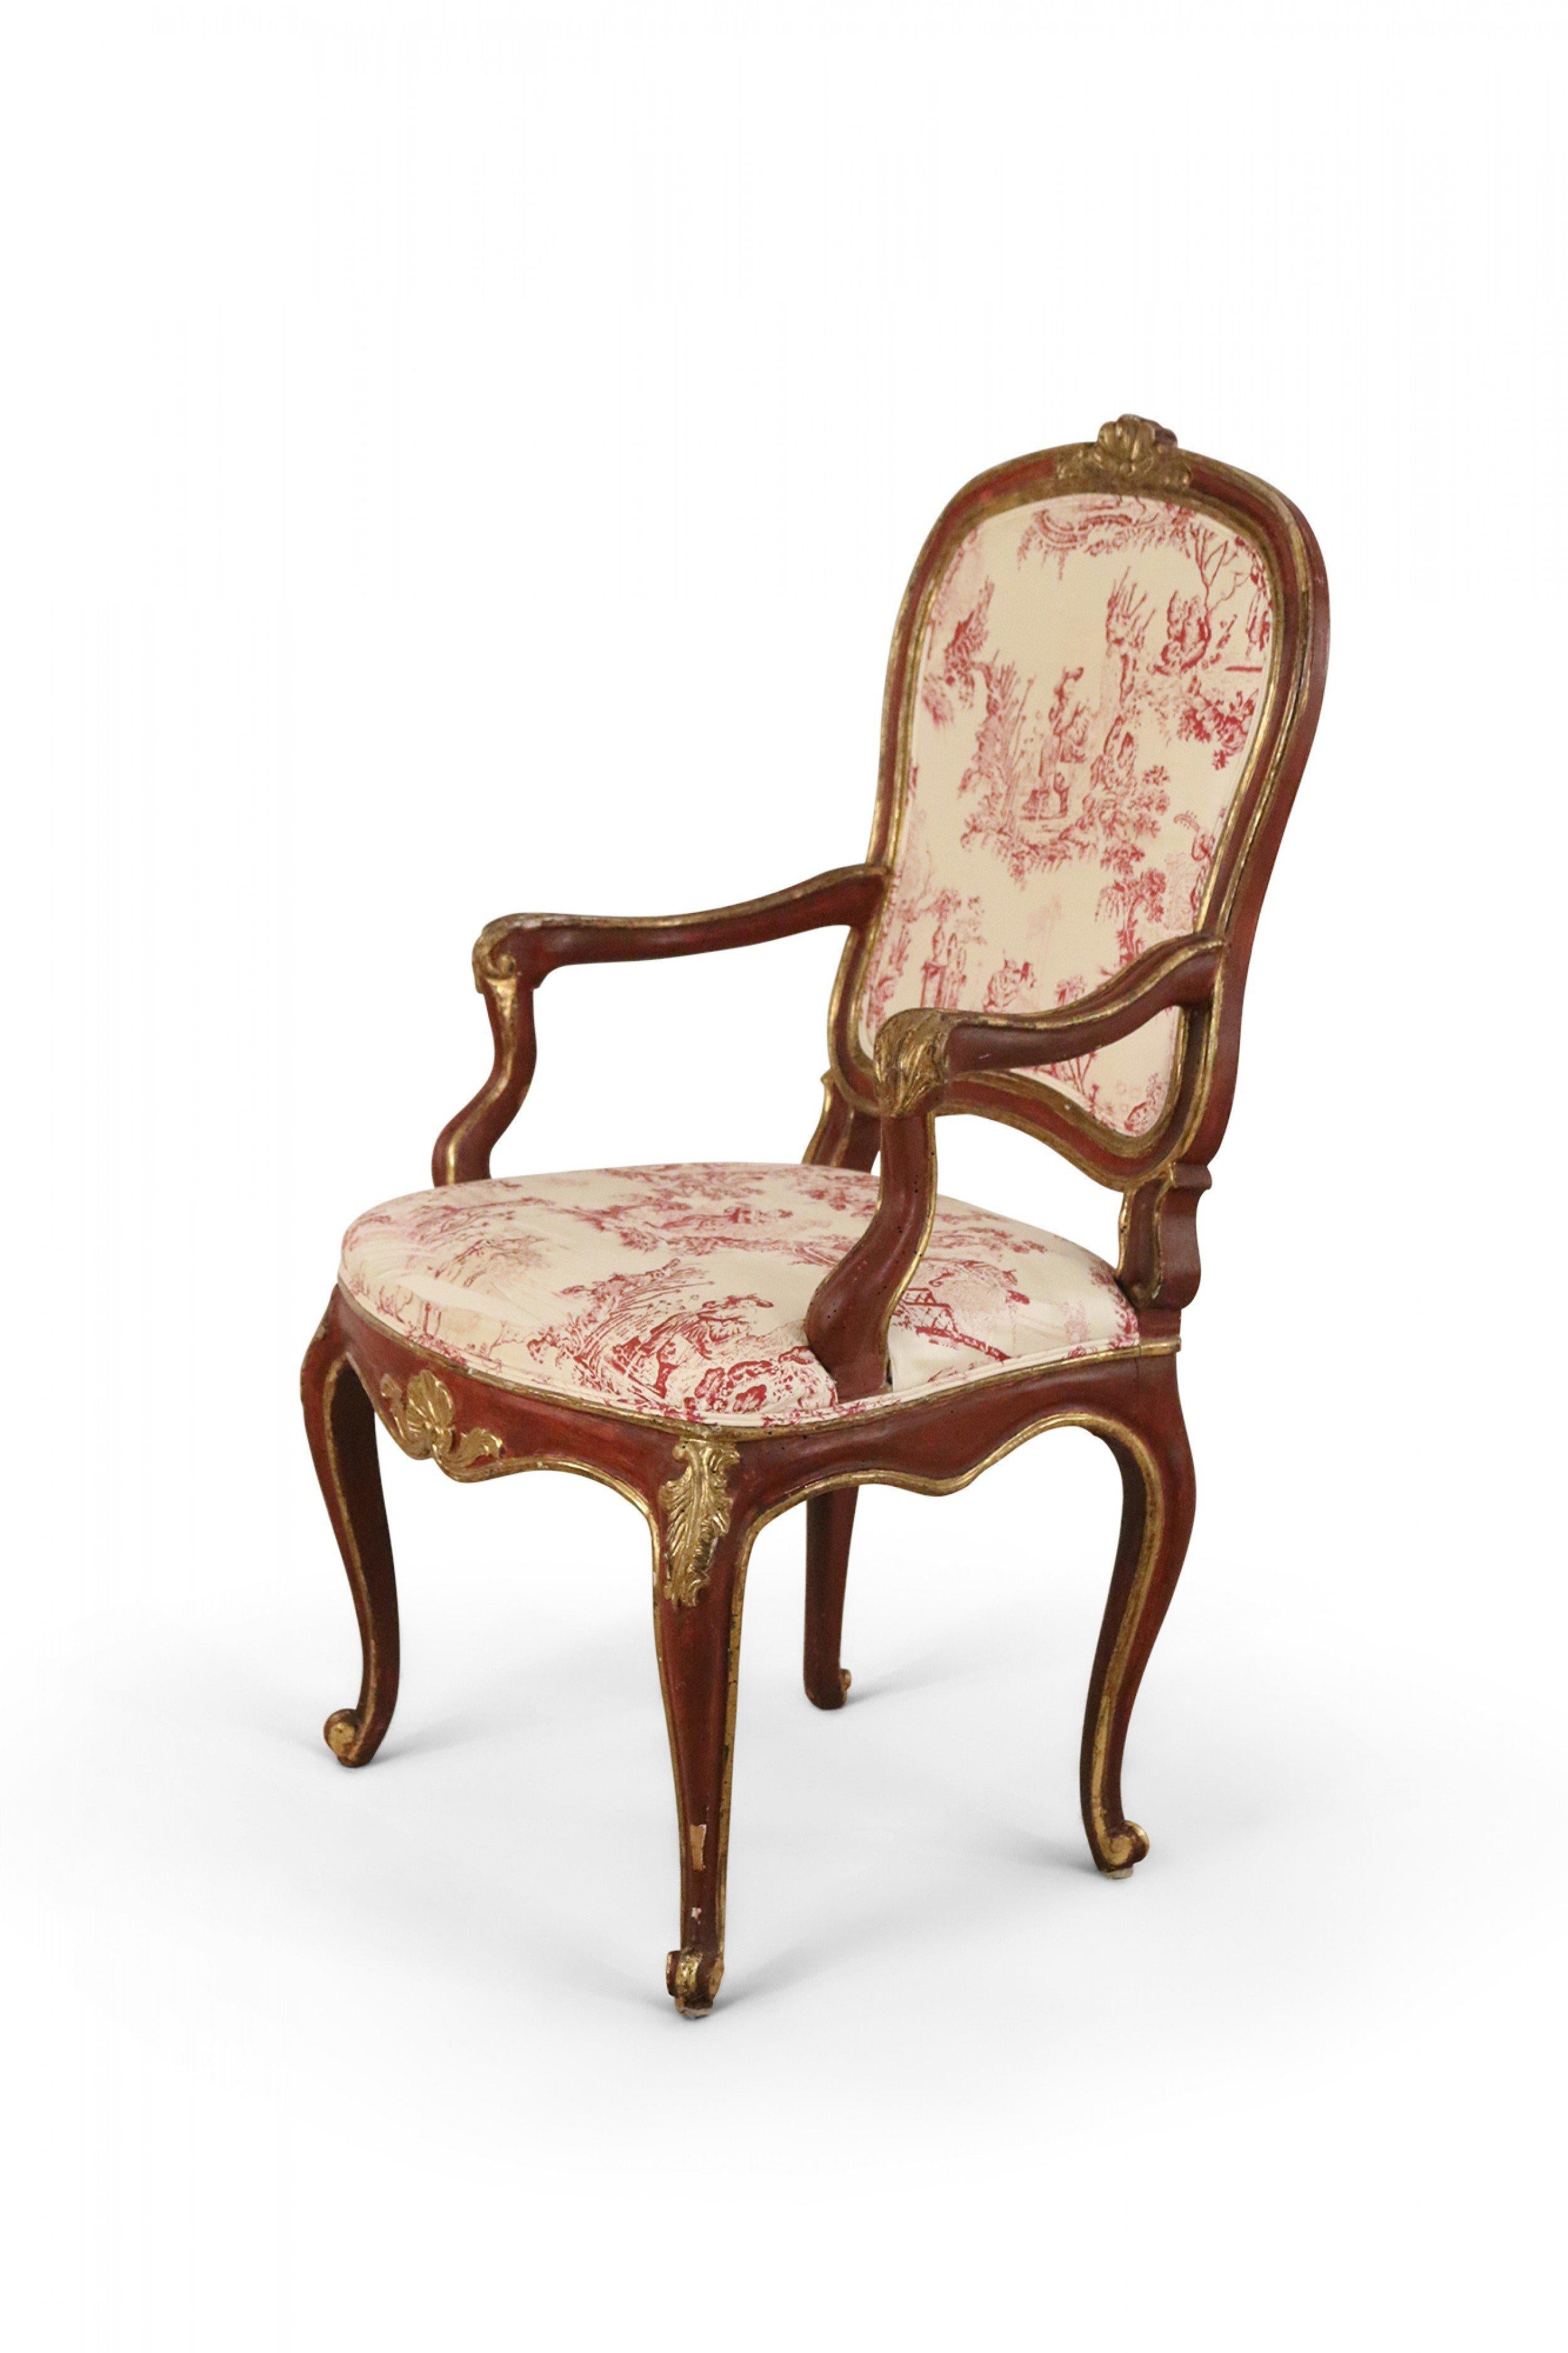 3 Italian Venetian (18th century) armchairs with red painted wooden frames with carved giltwood embellishments and beige and pink toile-patterned upholstered seat backs and seat cushions. (Priced Each).